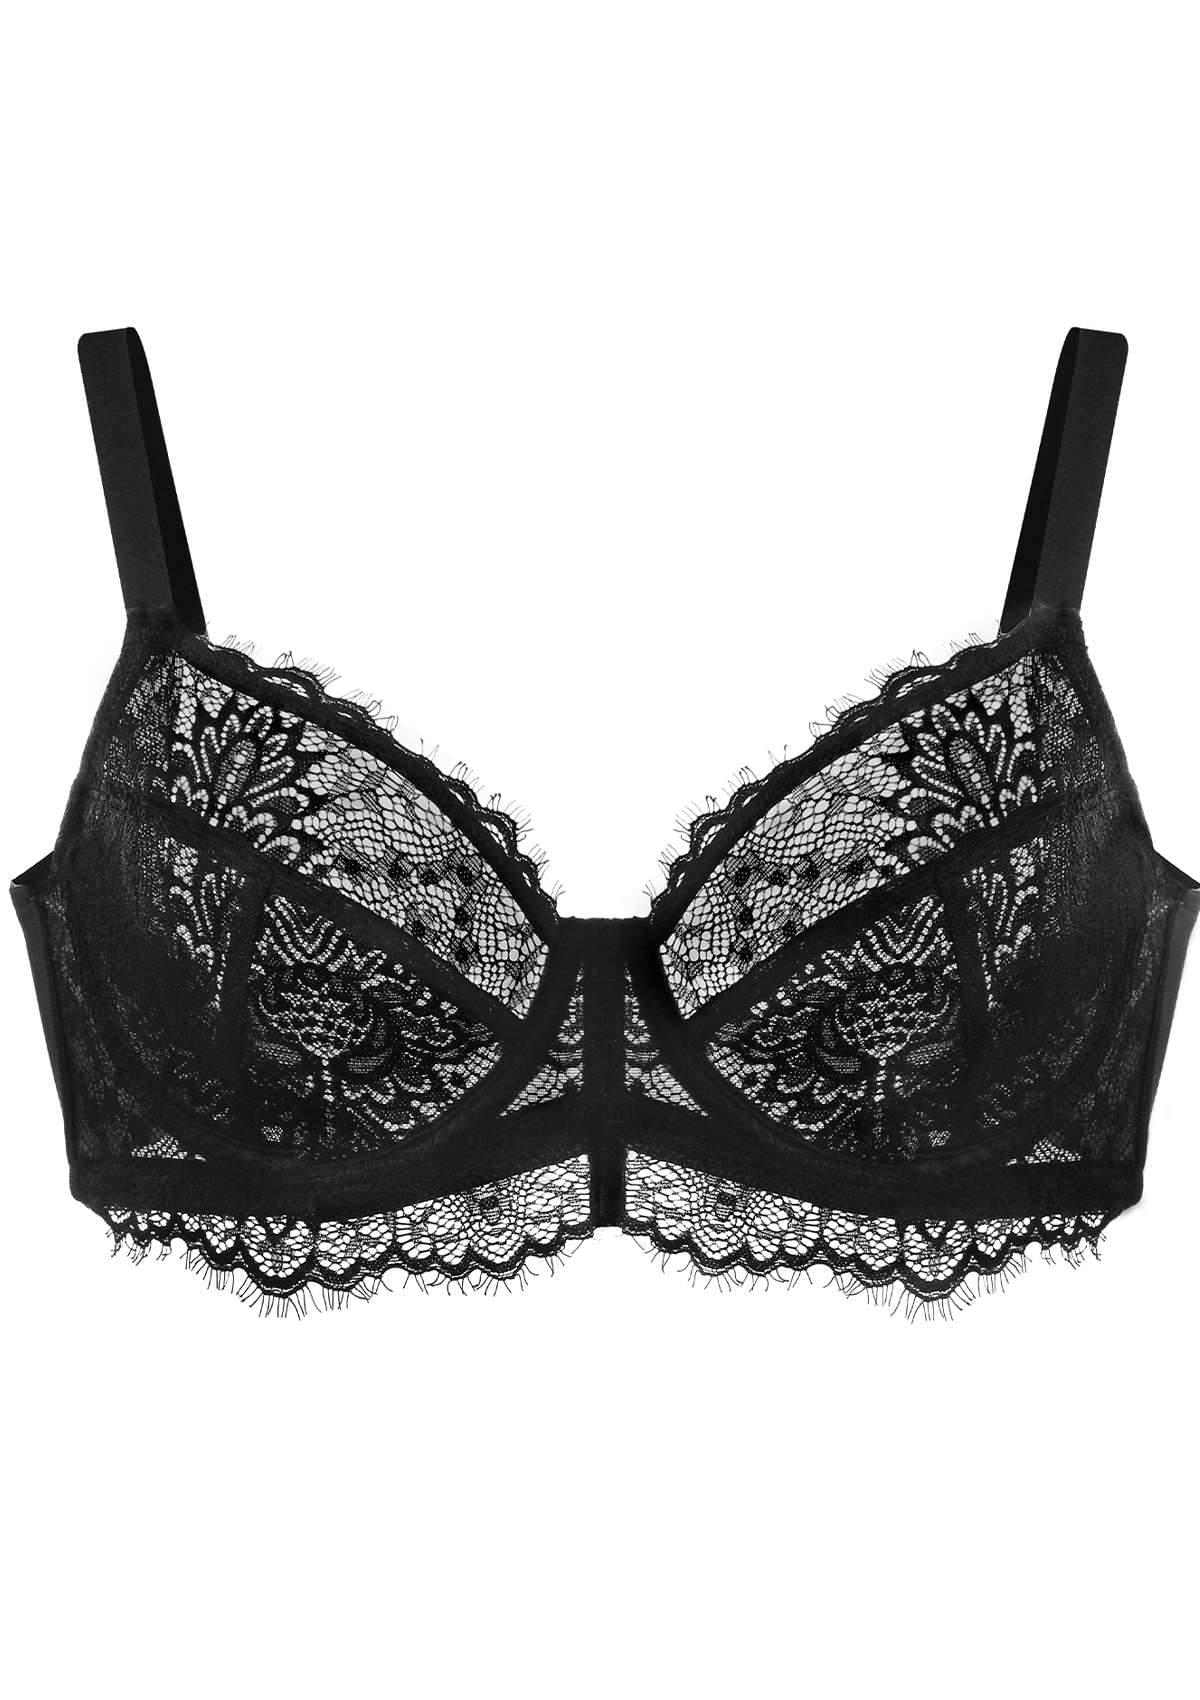 HSIA Sunflower Underwire Lace Bra: Unlined Full Coverage Support Bra - Black / 44 / D